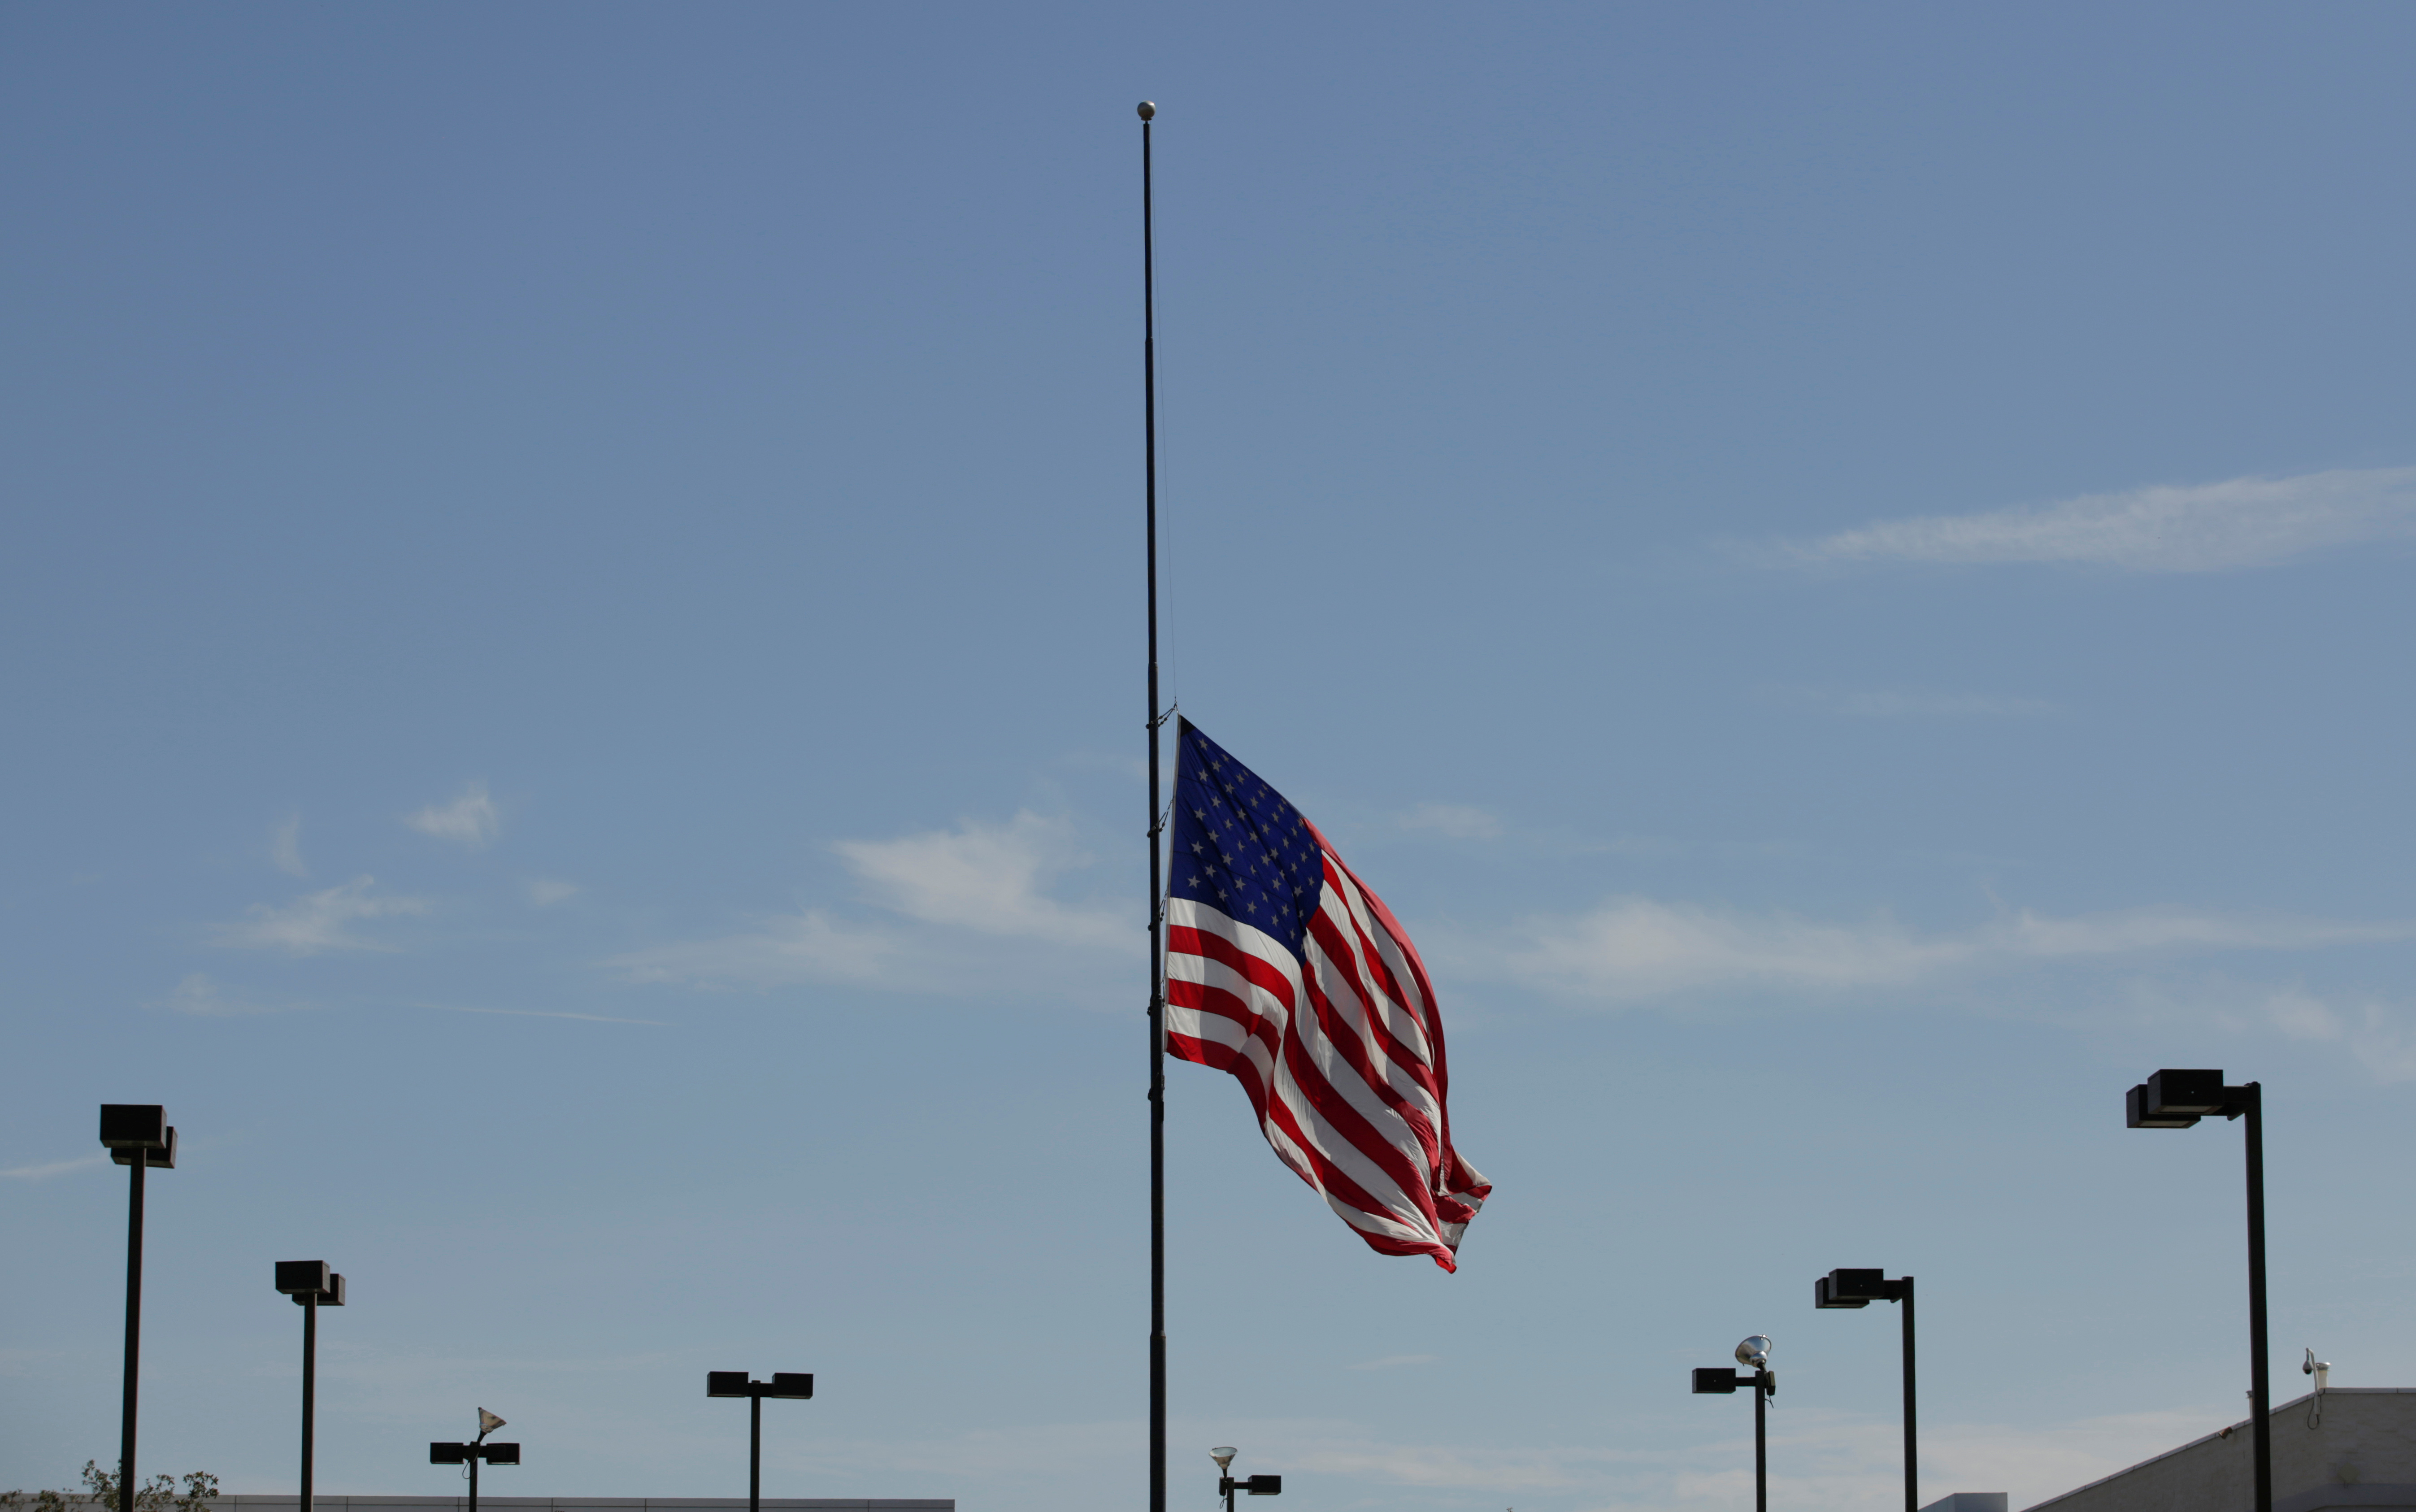 The U.S. flag is seen at half-mast, near the site of a mass shooting where 20 people lost their lives at a Walmart in El Paso, Texas, U.S. August 4, 2019. REUTERS/Jose Luis Gonzalez - RC1AFF1434D0